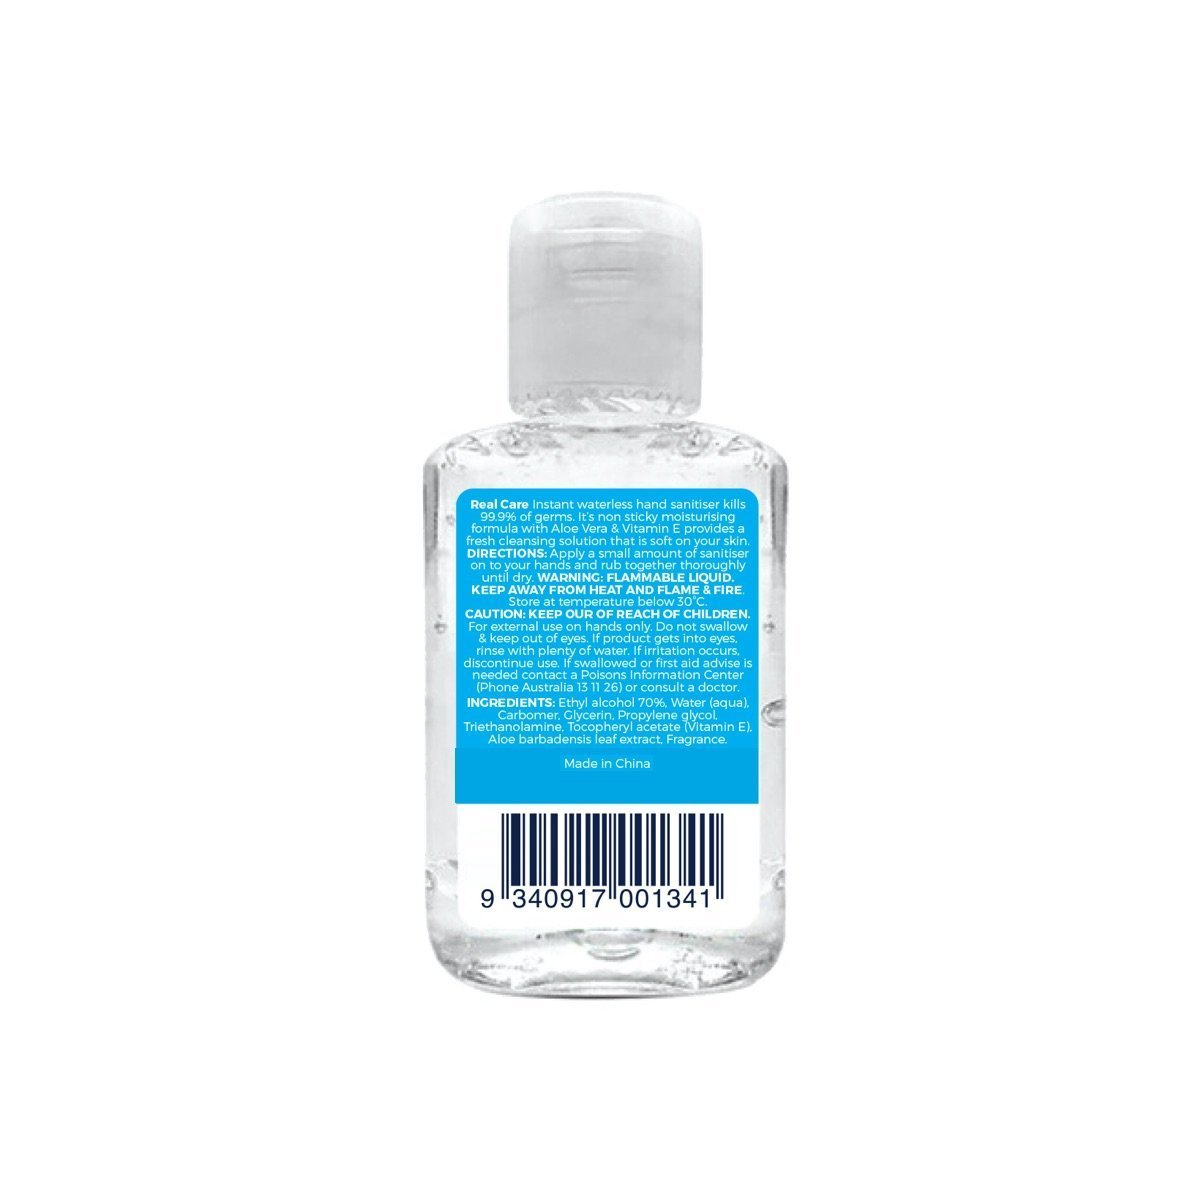 Real Care Hand Sanitiser 60ml 70% Ethyl Alcohol Kills 99% of Germs Tactical Gear Tactical Gear Supplier Tactical Distributors Australia